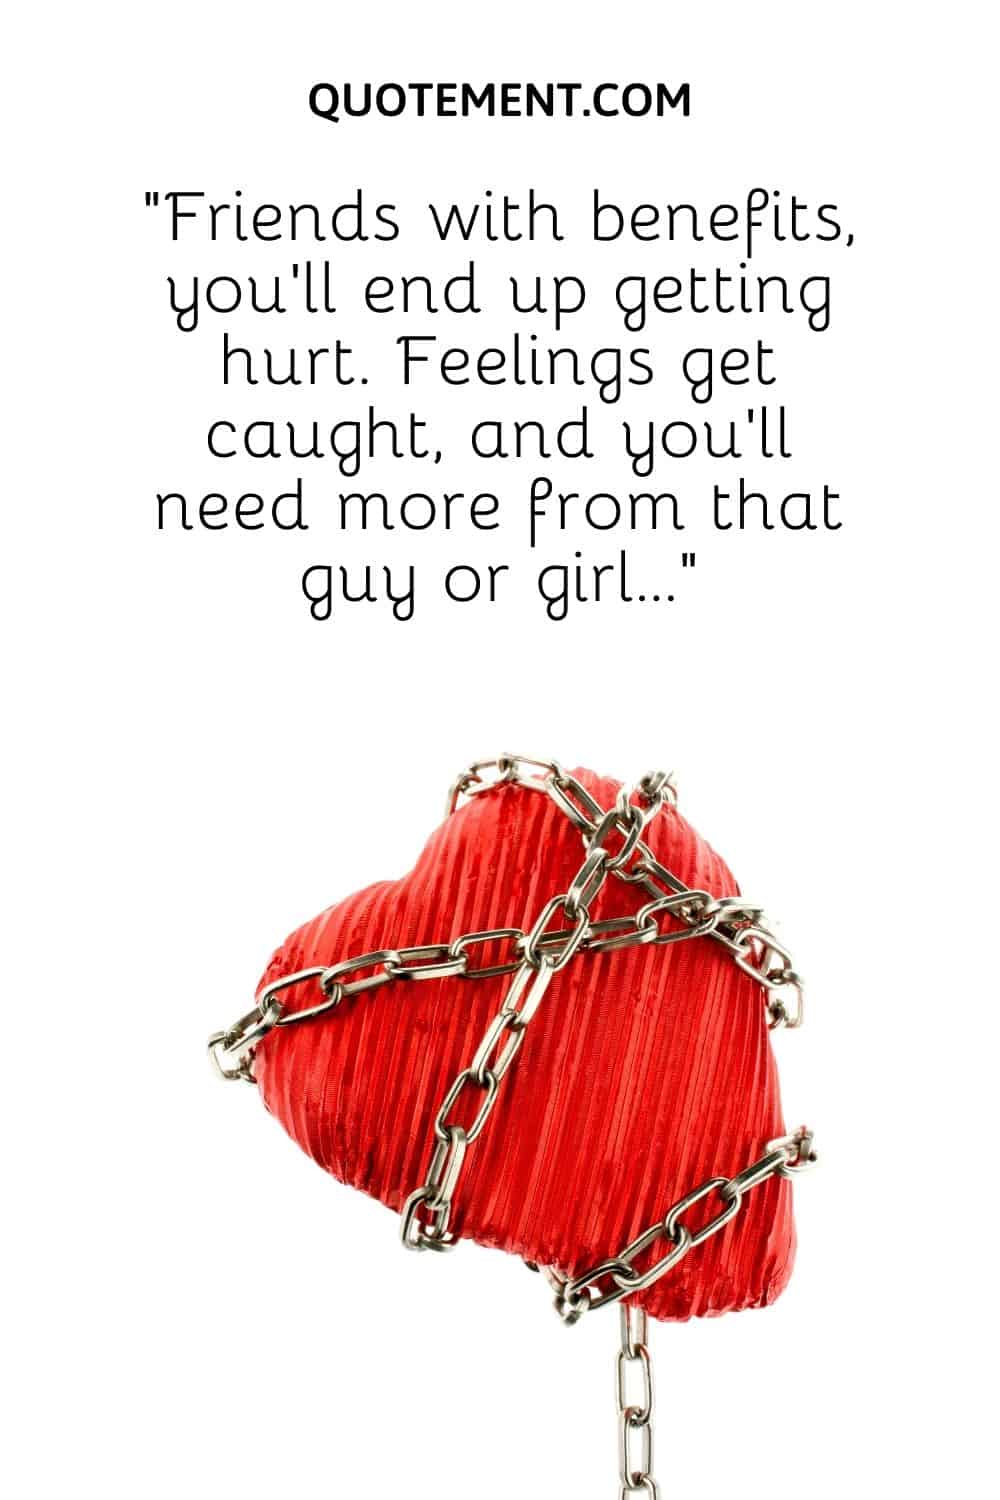 “Friends with benefits, you’ll end up getting hurt. Feelings get caught, and you’ll need more from that guy or girl…”